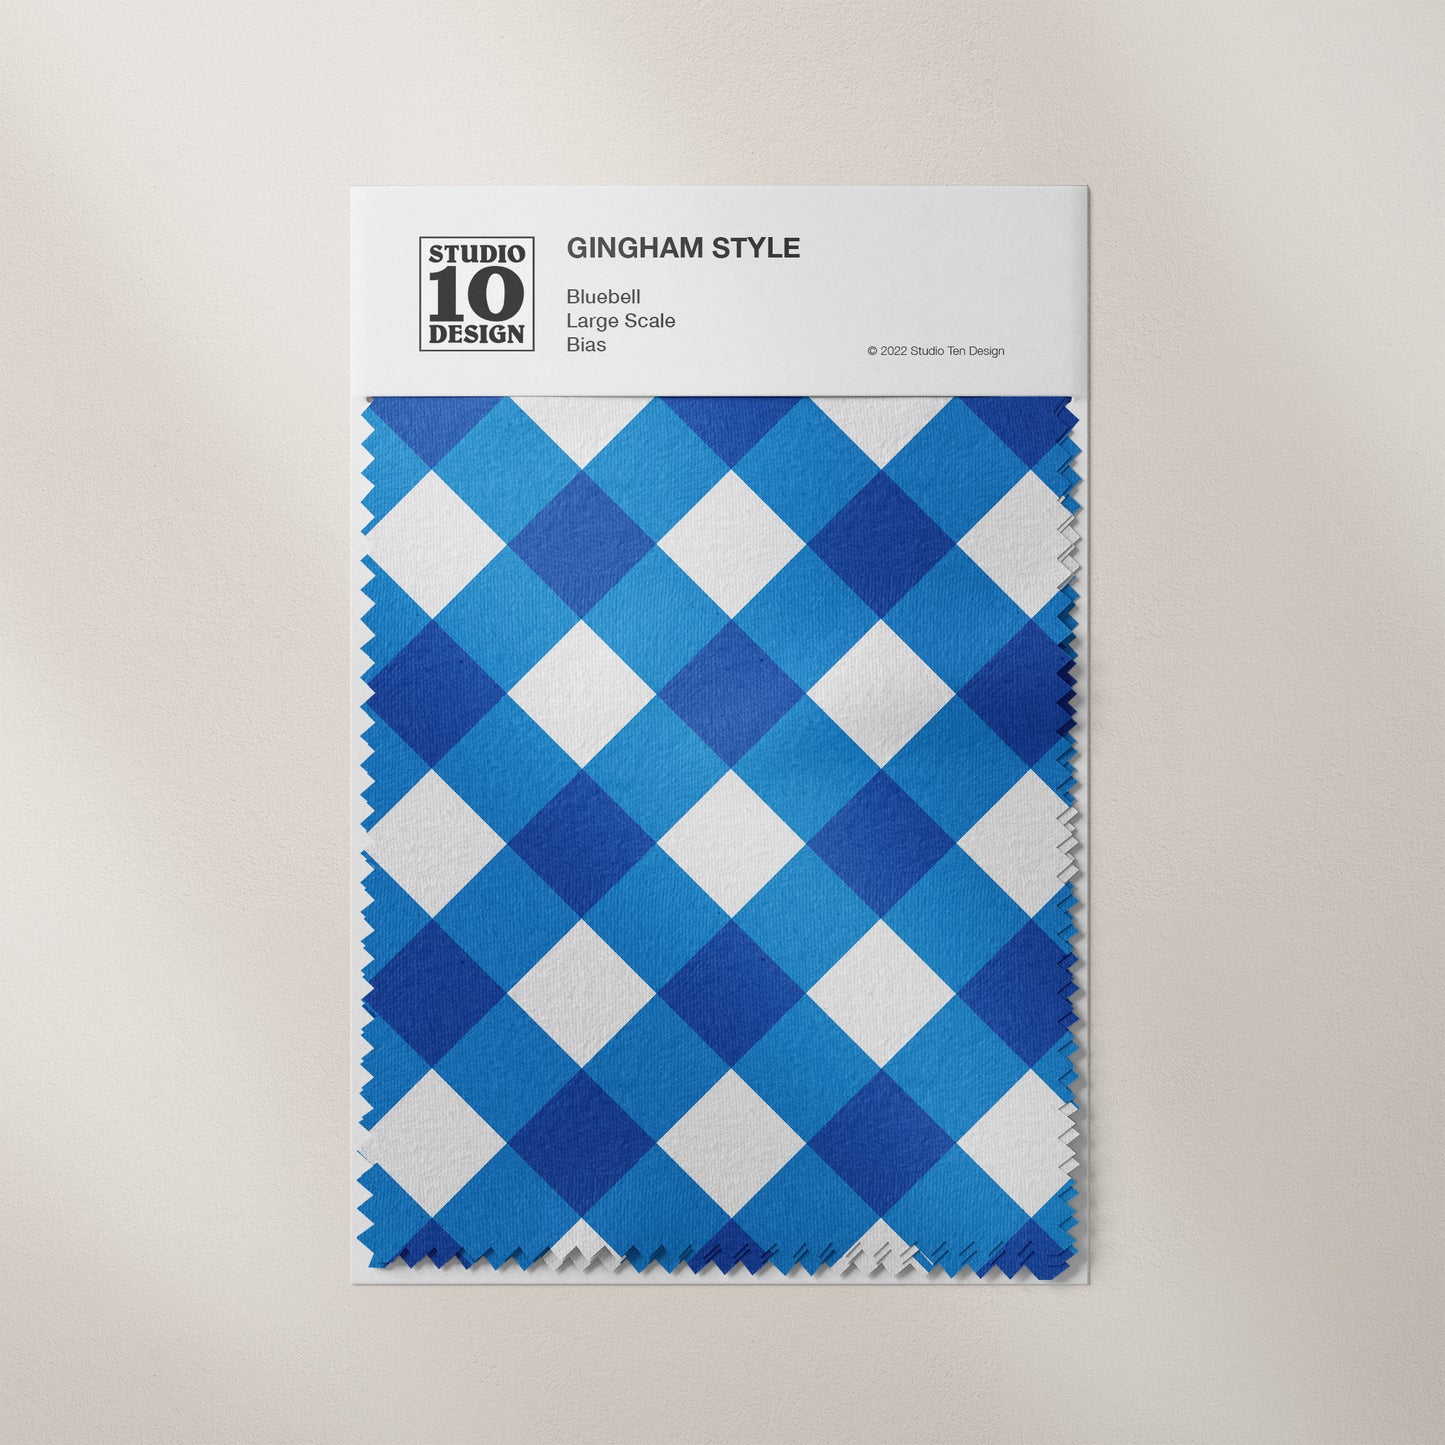 Gingham Style Bluebell Large Bias Printed Fabric by Studio Ten Design